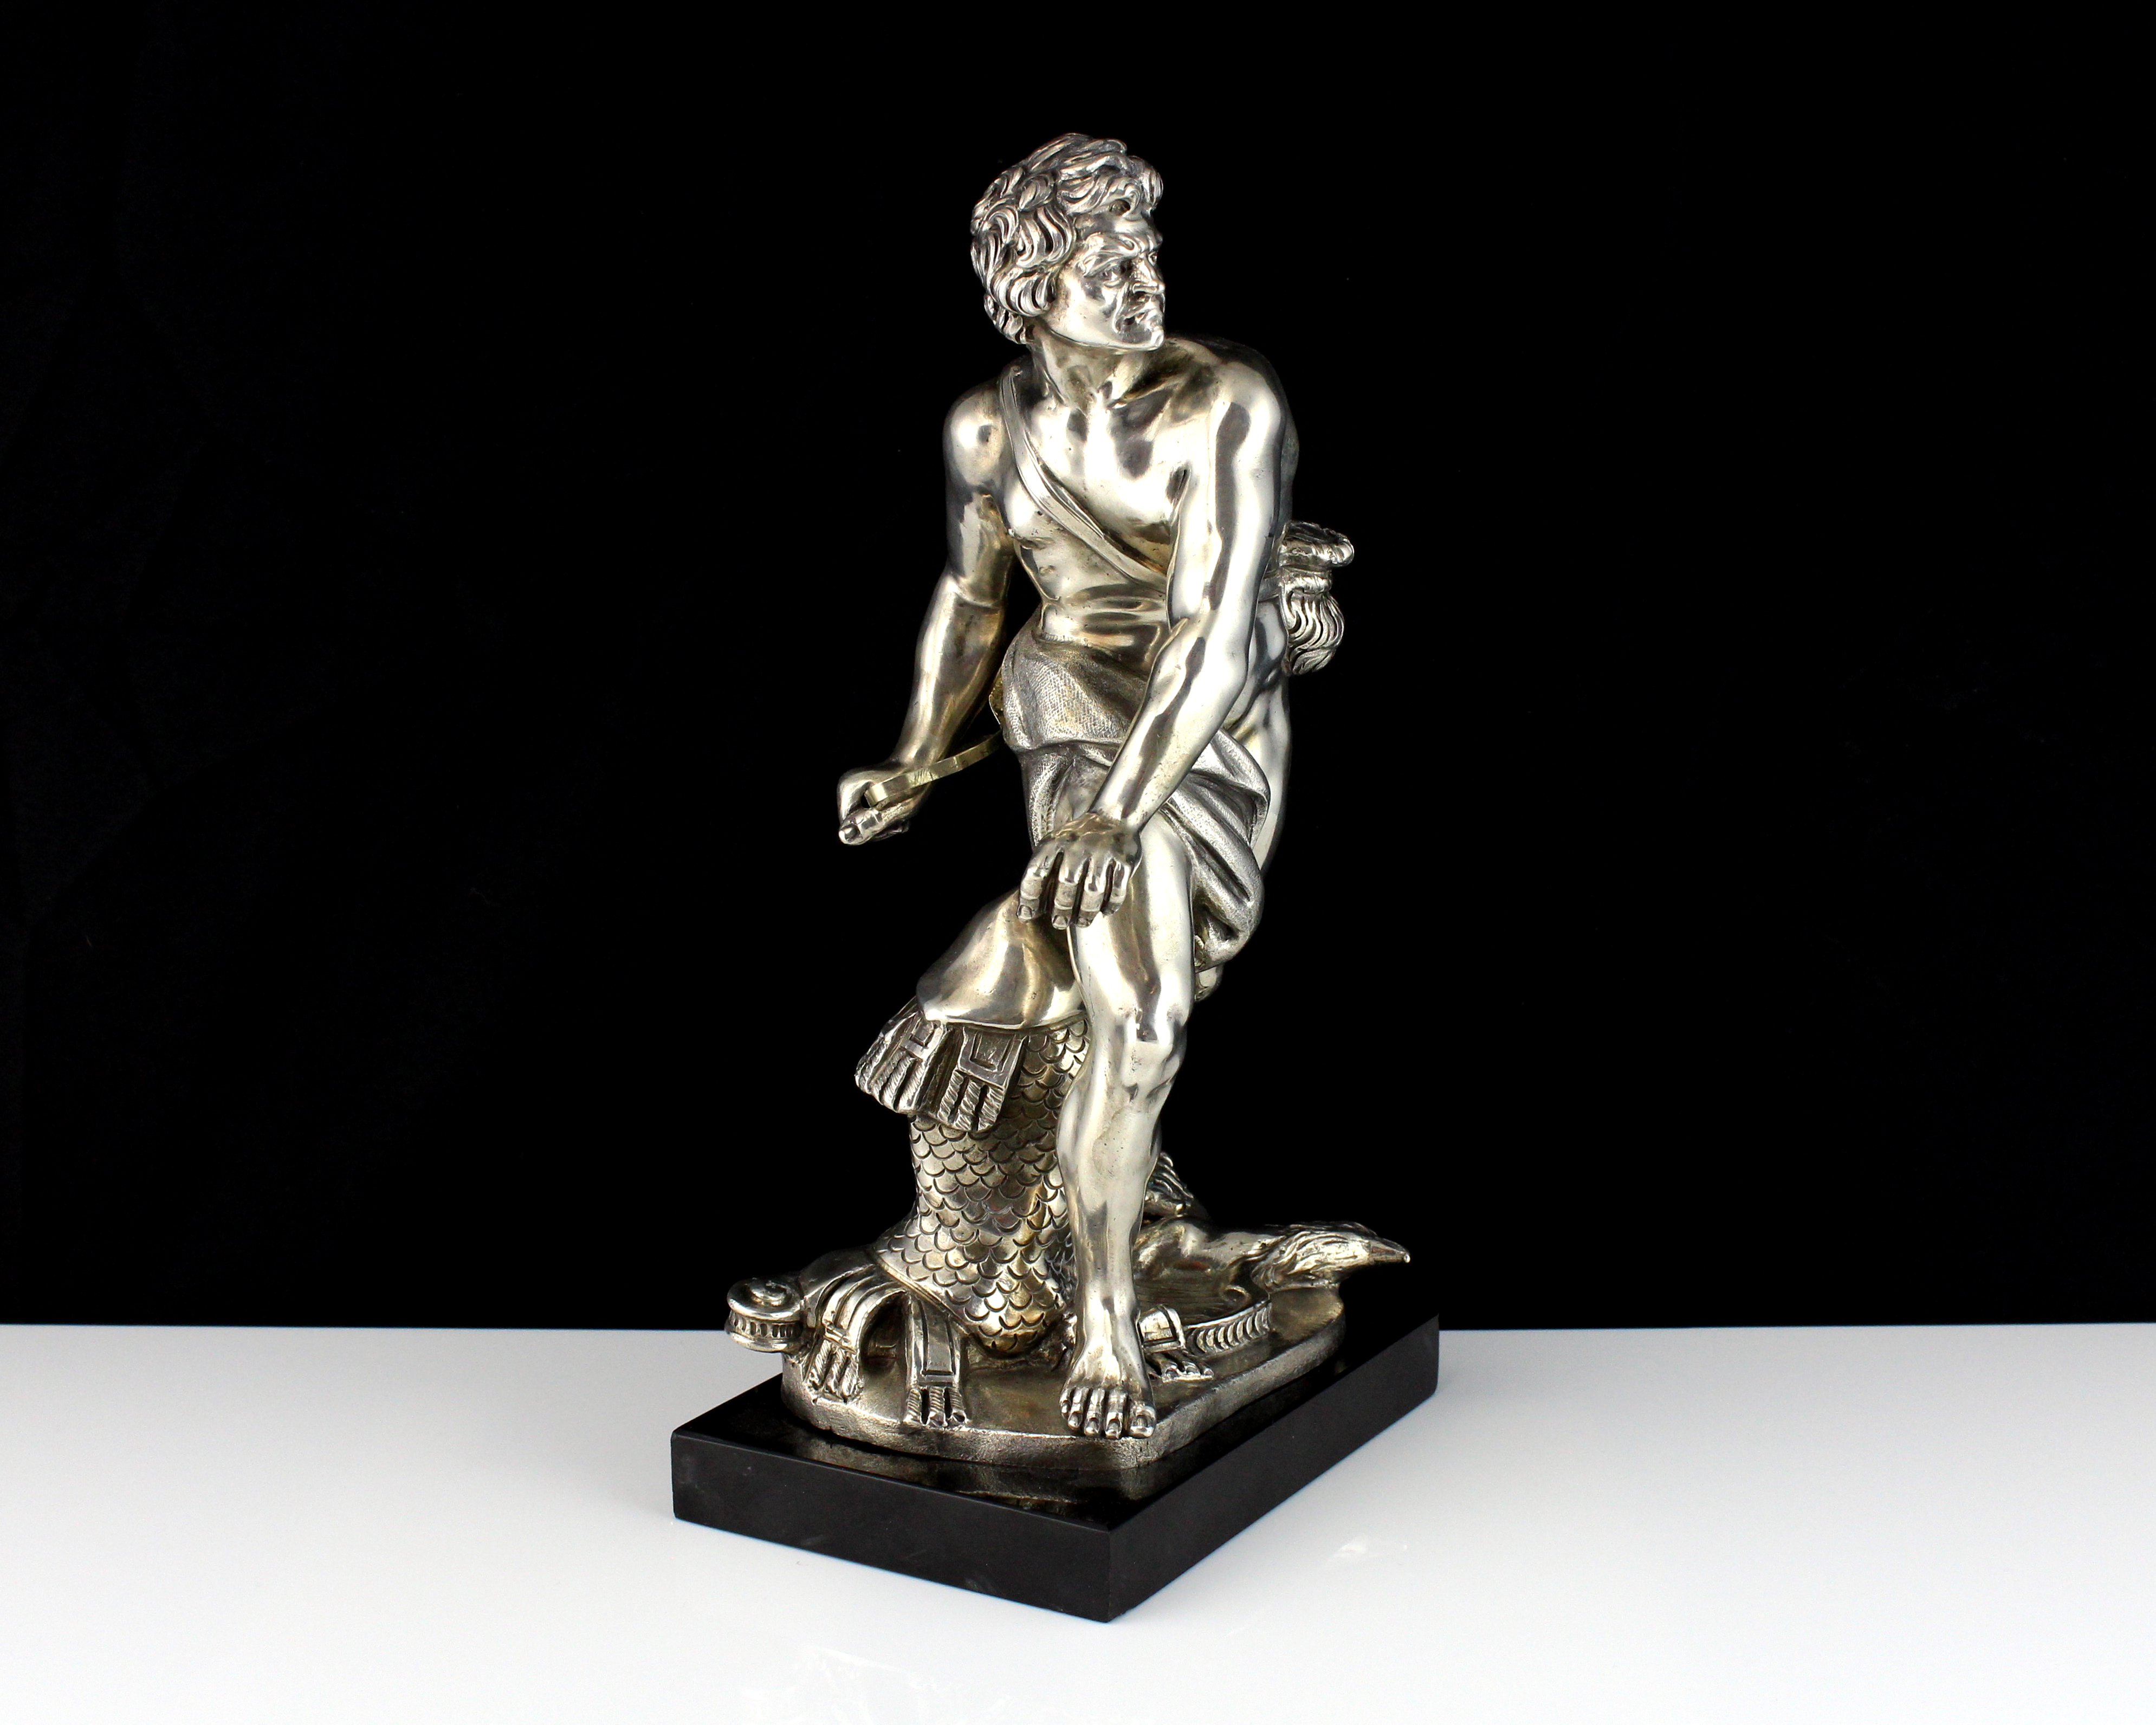 An Italian Silver sculpture after David by Gian Lorenzo Bernini depicting David with slingshot about